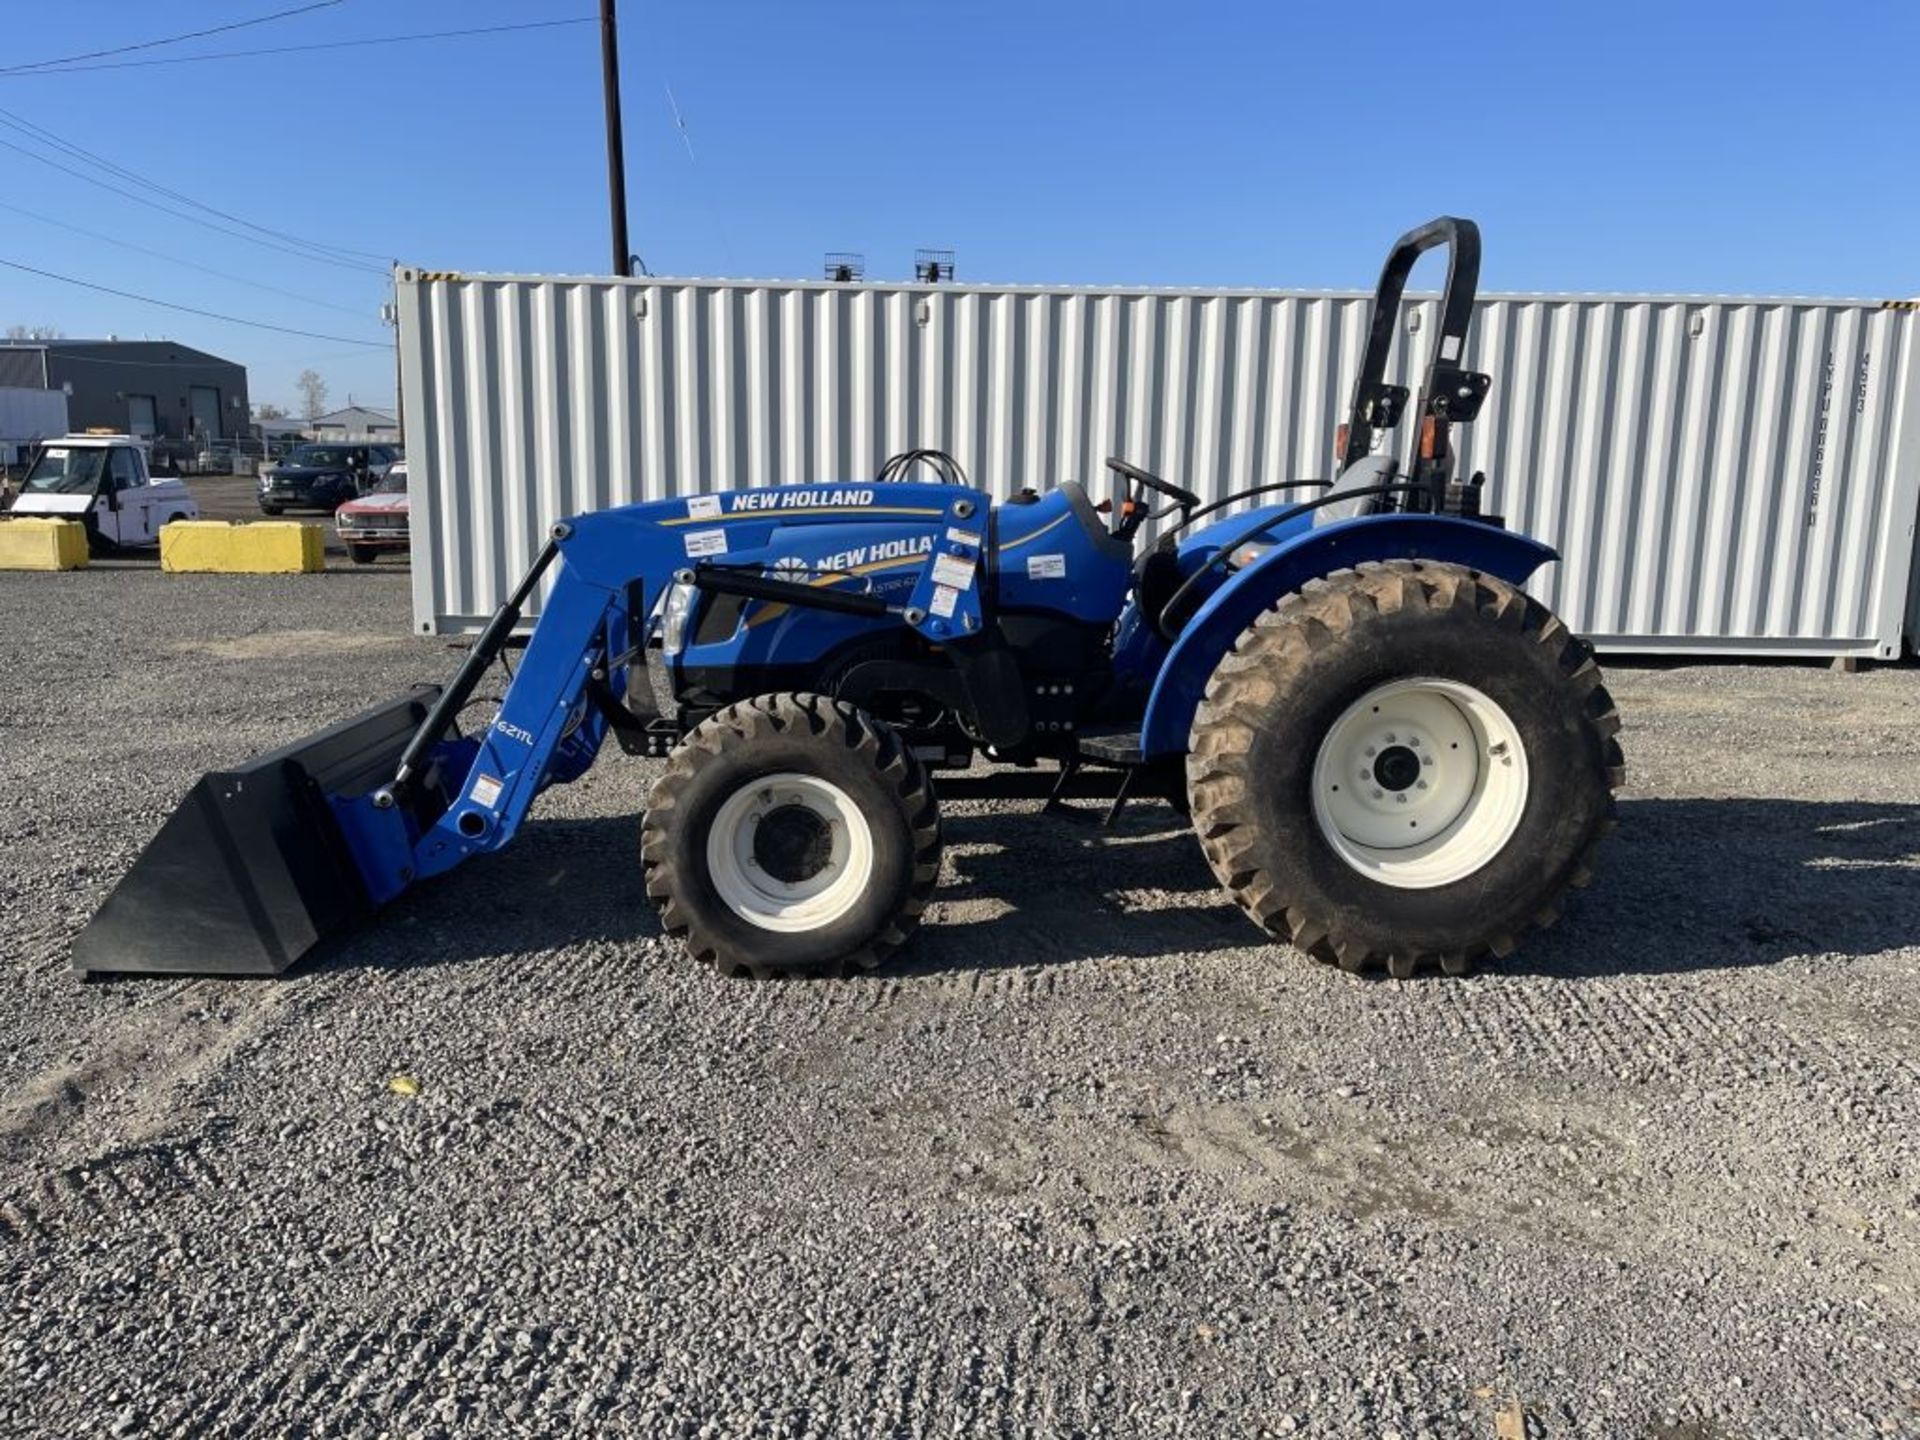 2017 Newholland Workmaster 60 Utility Tractor - Image 7 of 30